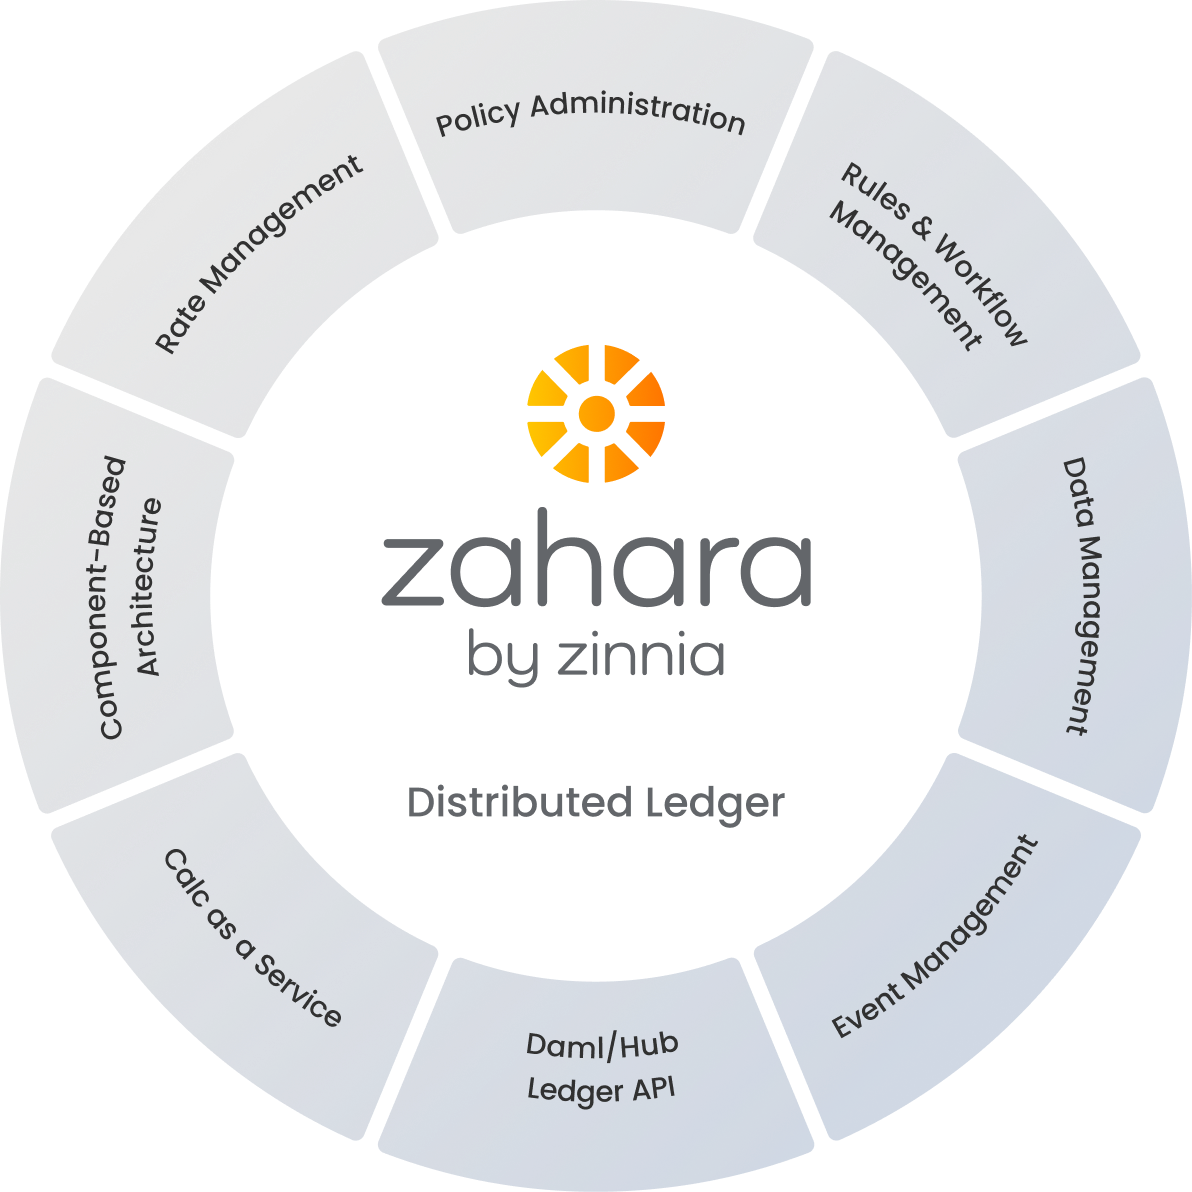 Light gray circle graph on white background describing the Zahara product’s features and capabilities.